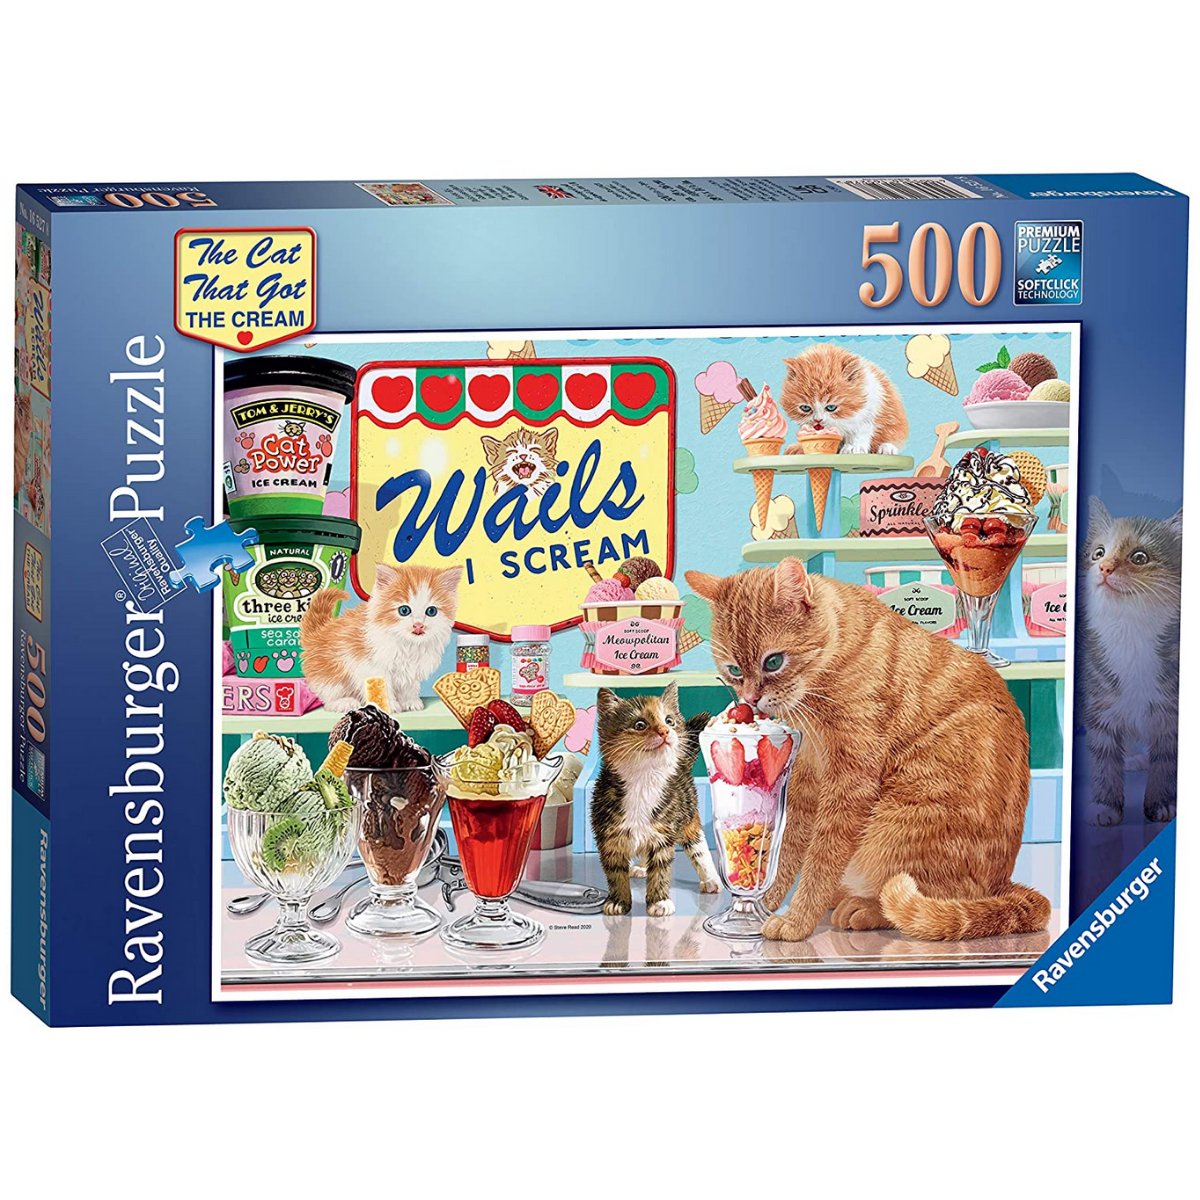 Ravensburger The Cat That Got The Cream Jigsaw Puzzle (500 Pieces) - Phillips Hobbies